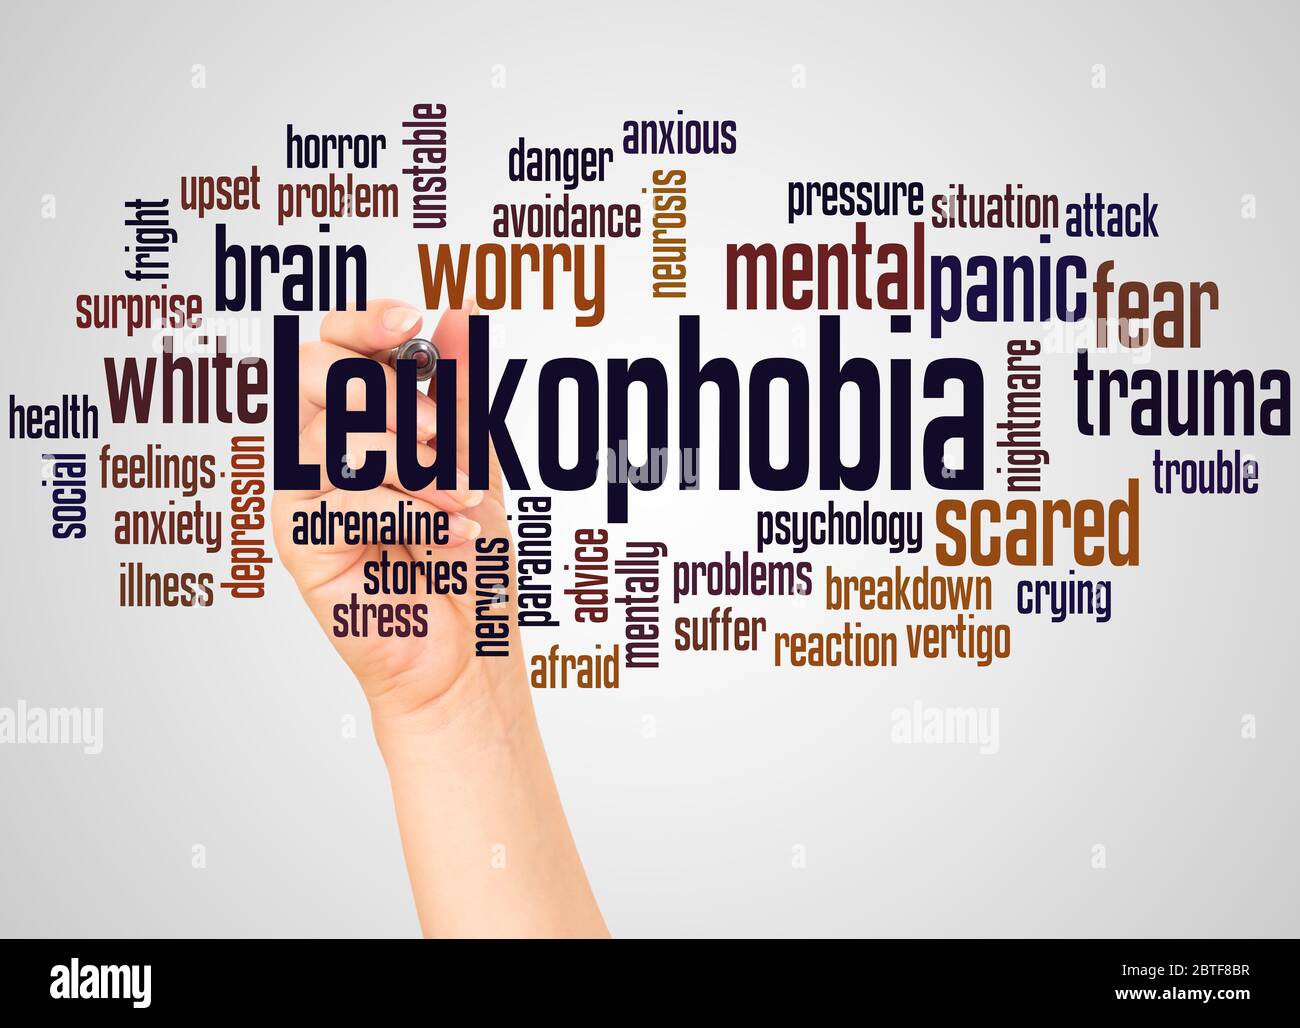 Leukophobia fear of the color white word cloud and hand with marker concept on white background. Stock Photo